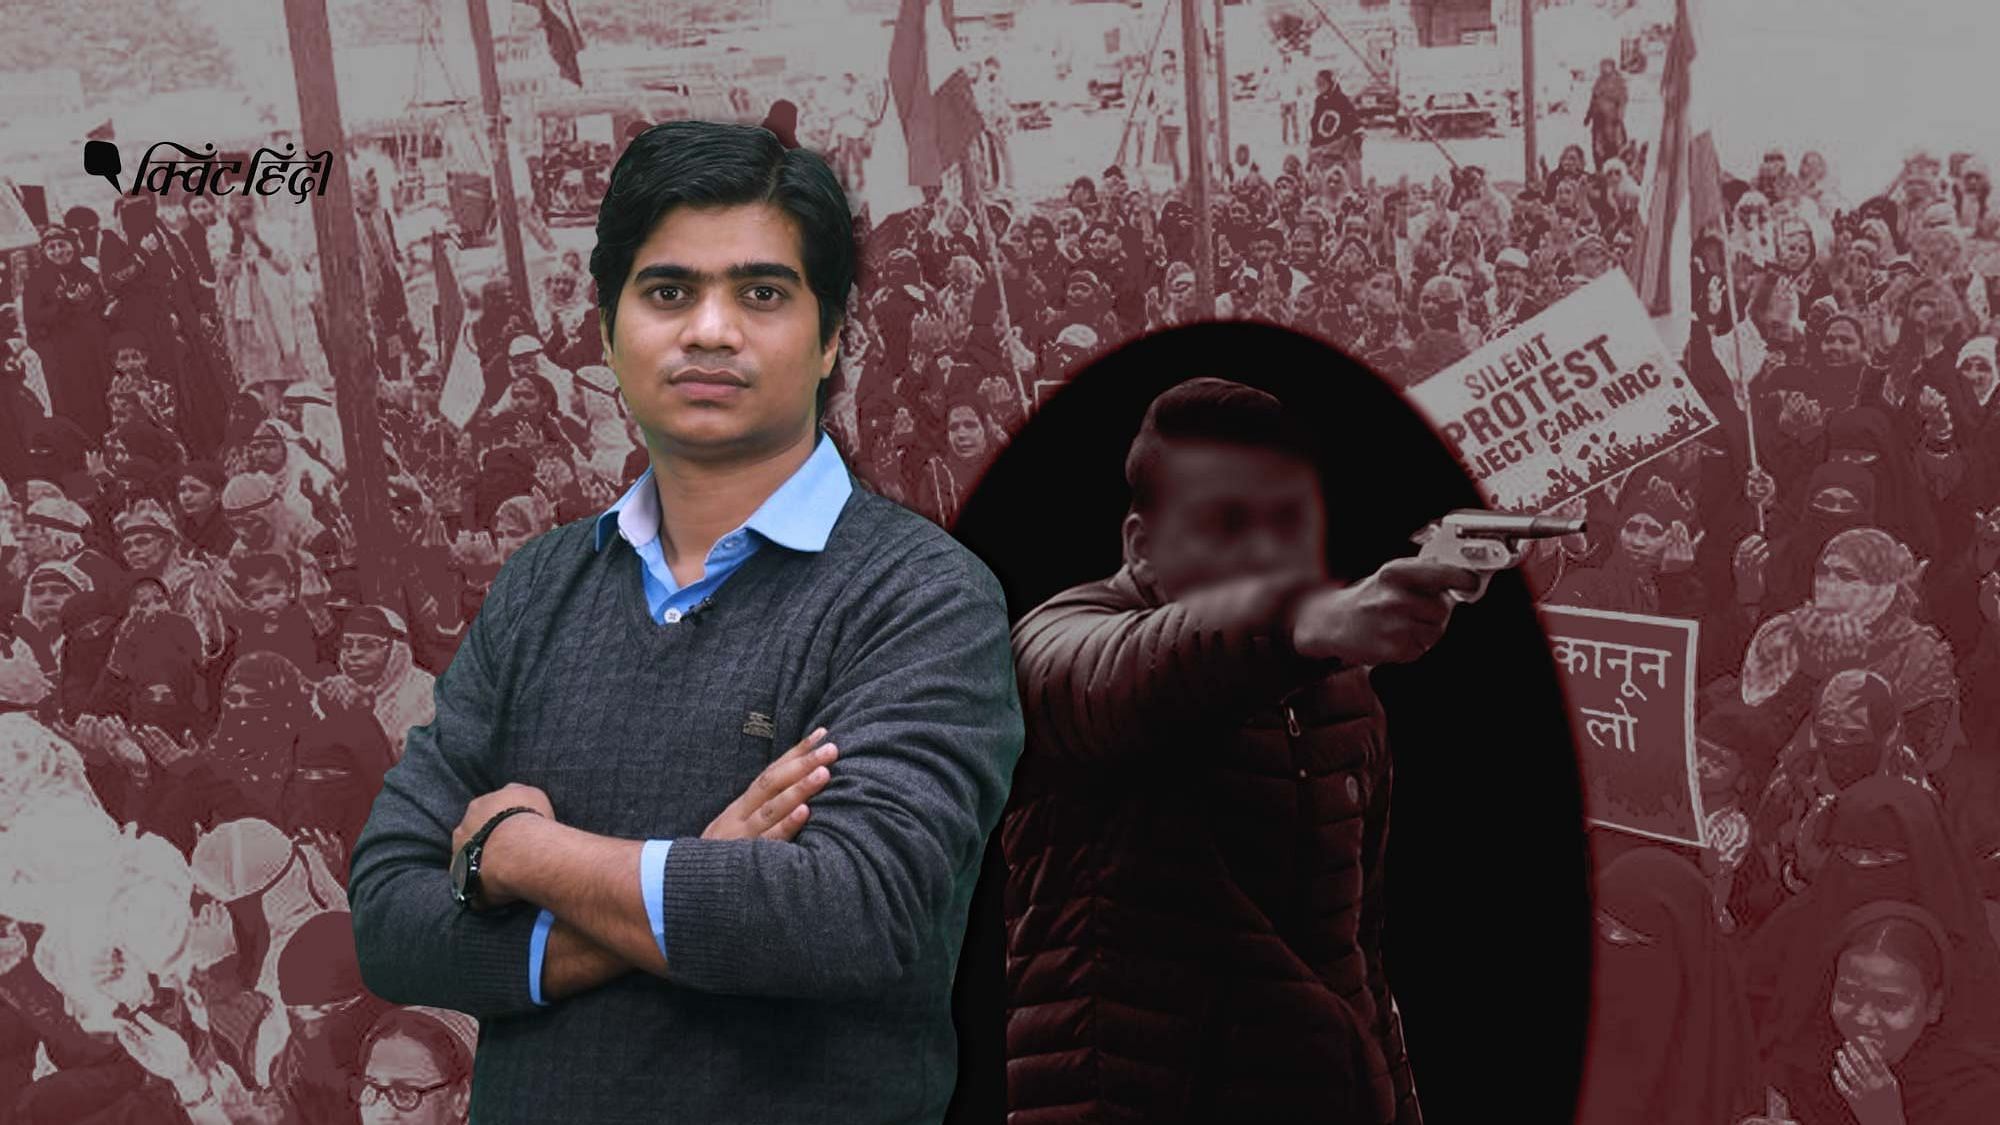 Who Is the ‘mastermind’ behind the Jamia shooting?